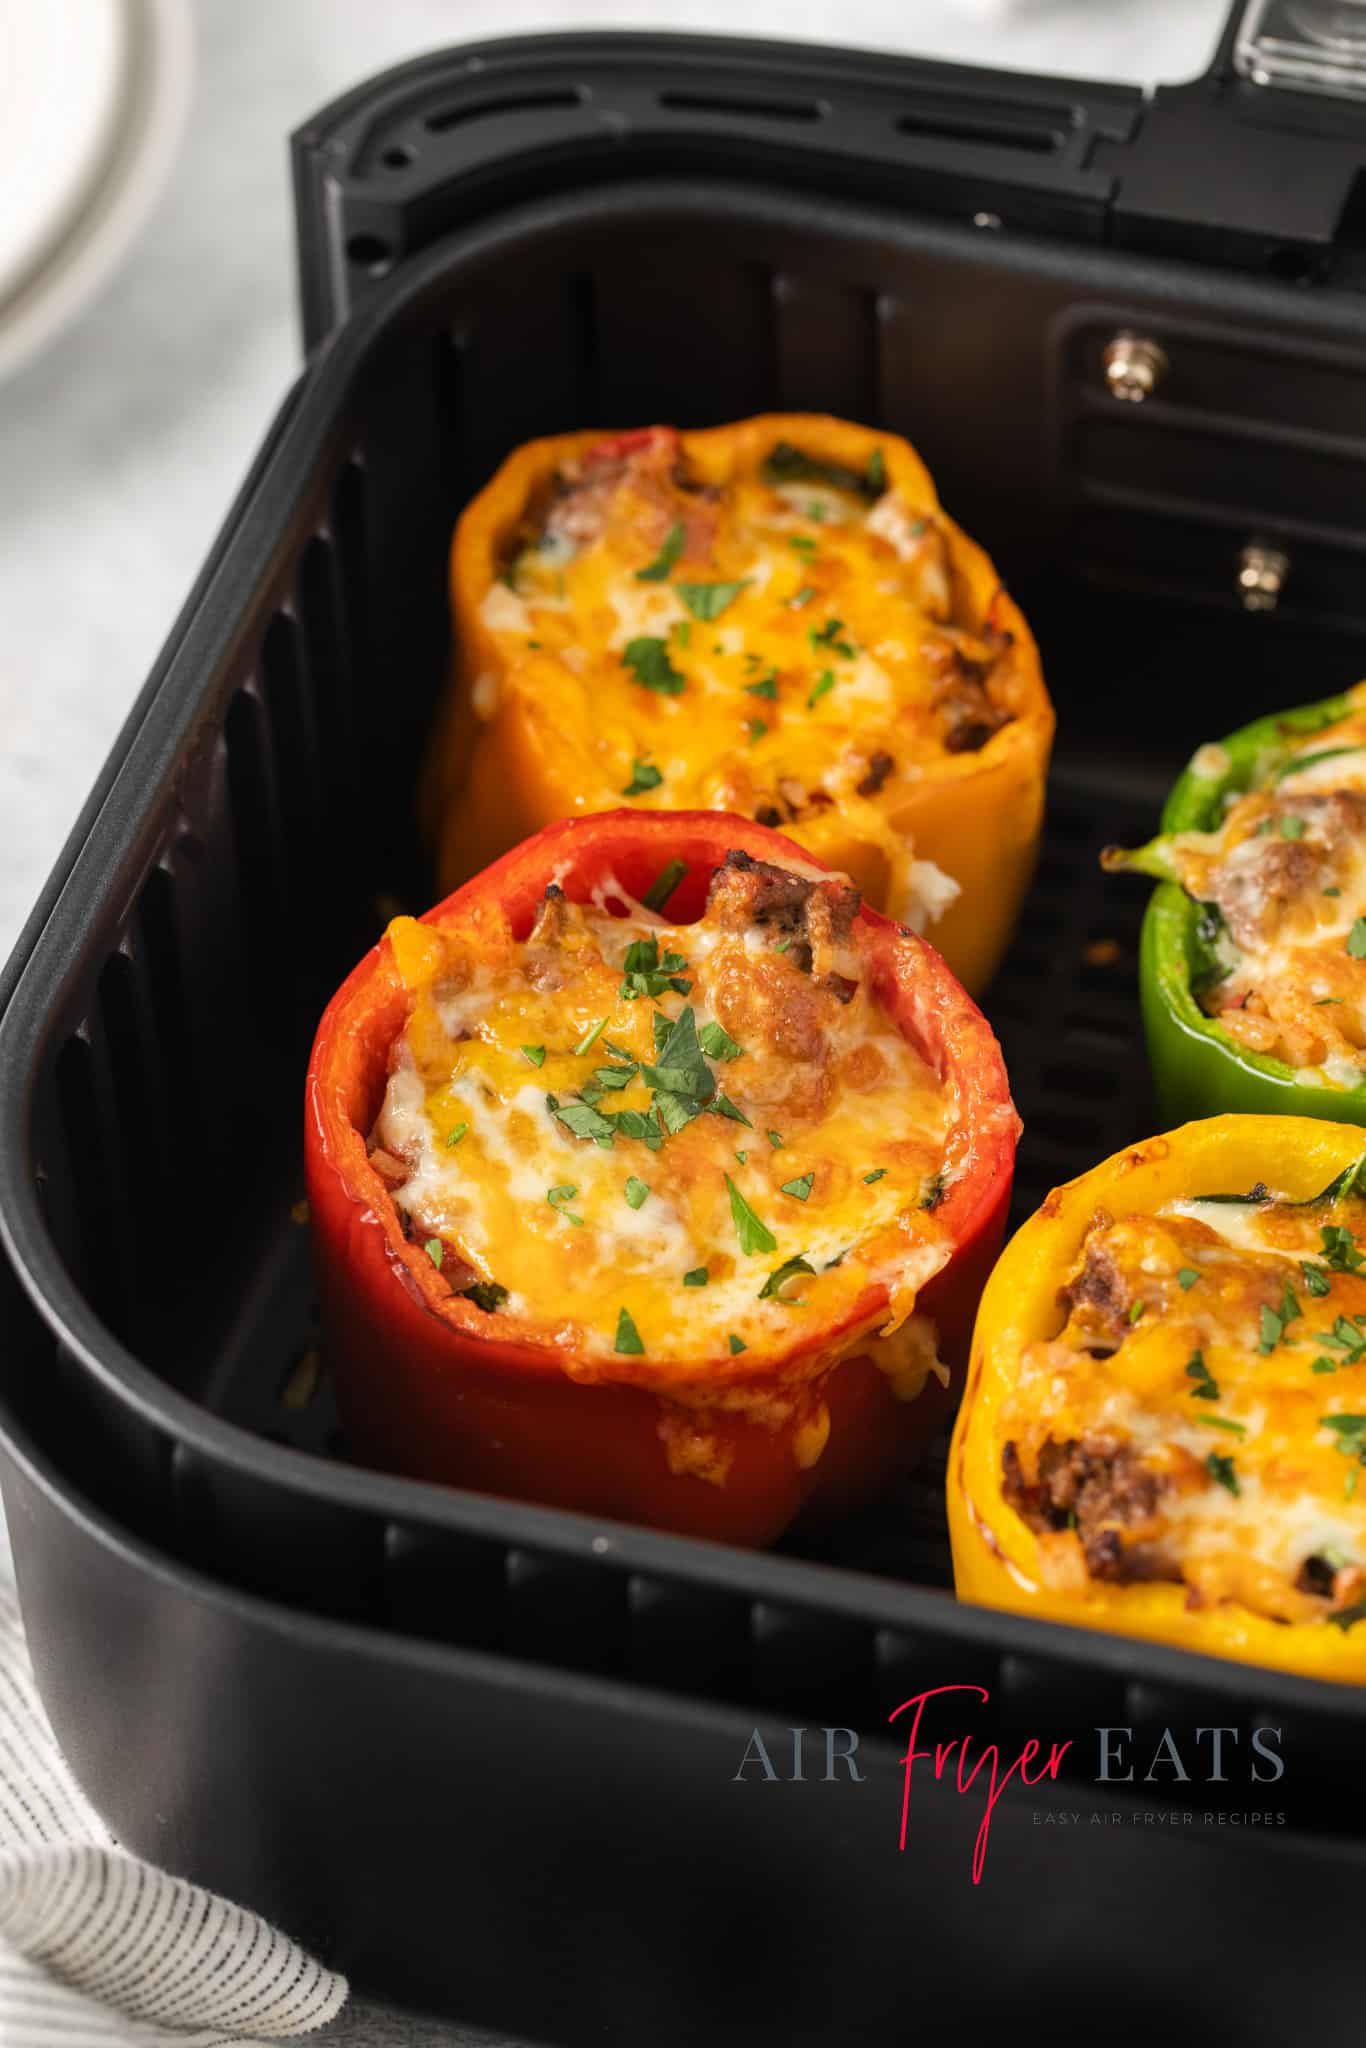 stuffed peppers topped with melted cheese, in a black air fryer basket.